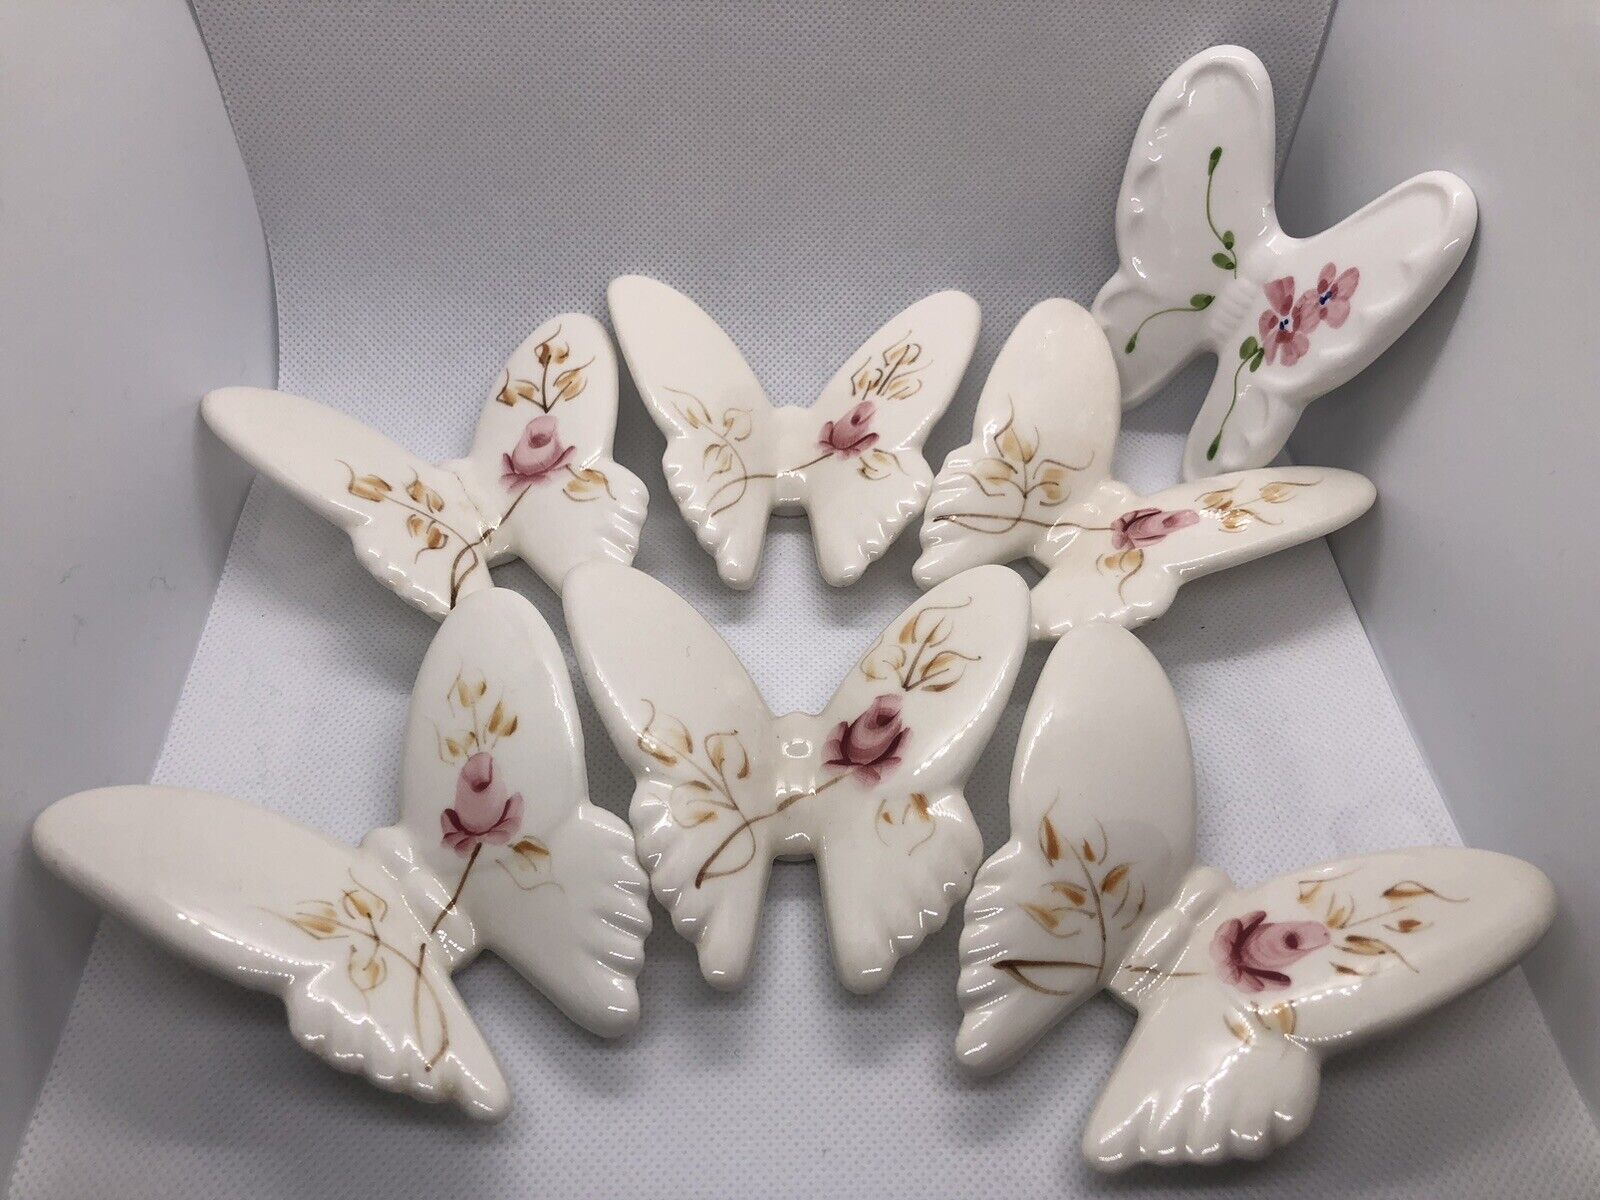 6 Porcelain Butterfly Figurine Wall Hanging Hand Painted White Pink -Lasting USA